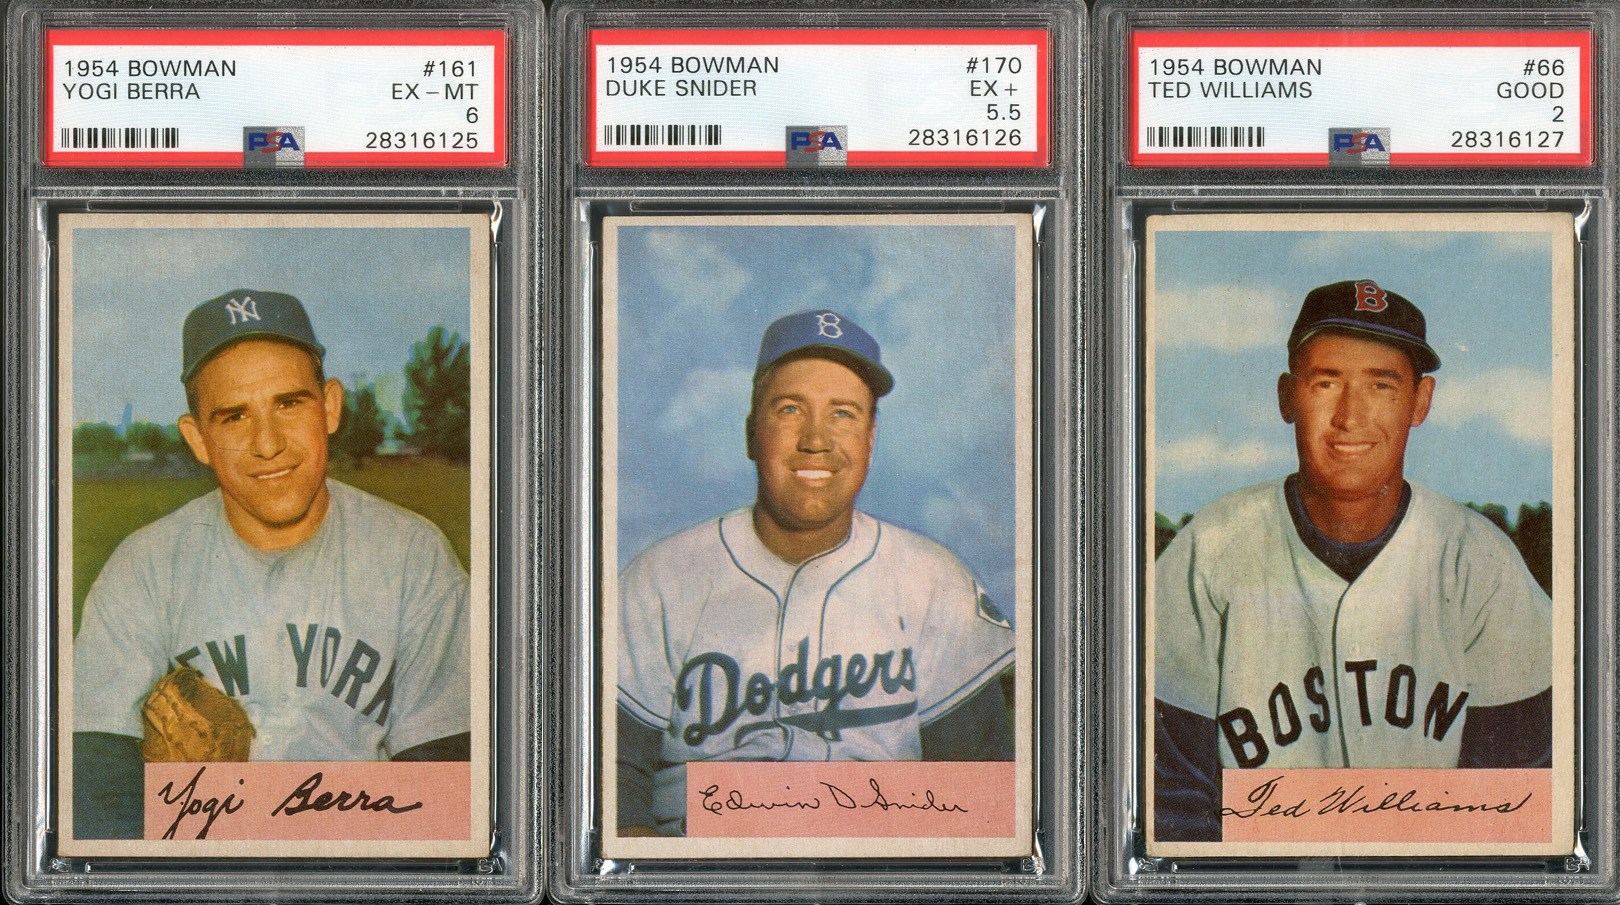 - 1954 Bowman Complete Set of 225 Cards including #66 Ted Williams with PSA Graded!